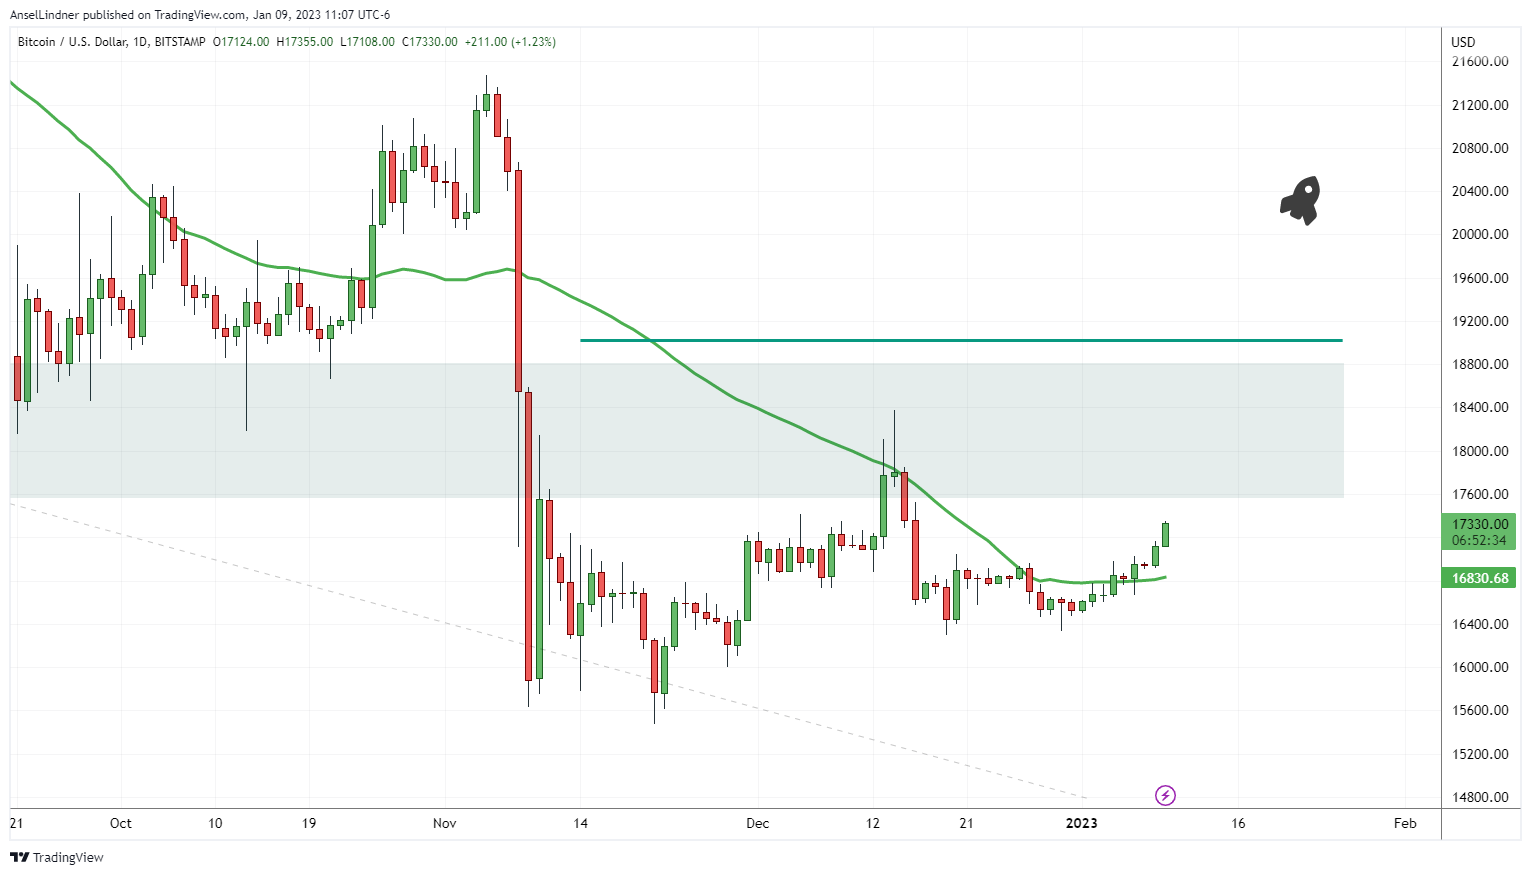 Bitcoin daily chart with green 50-day moving average